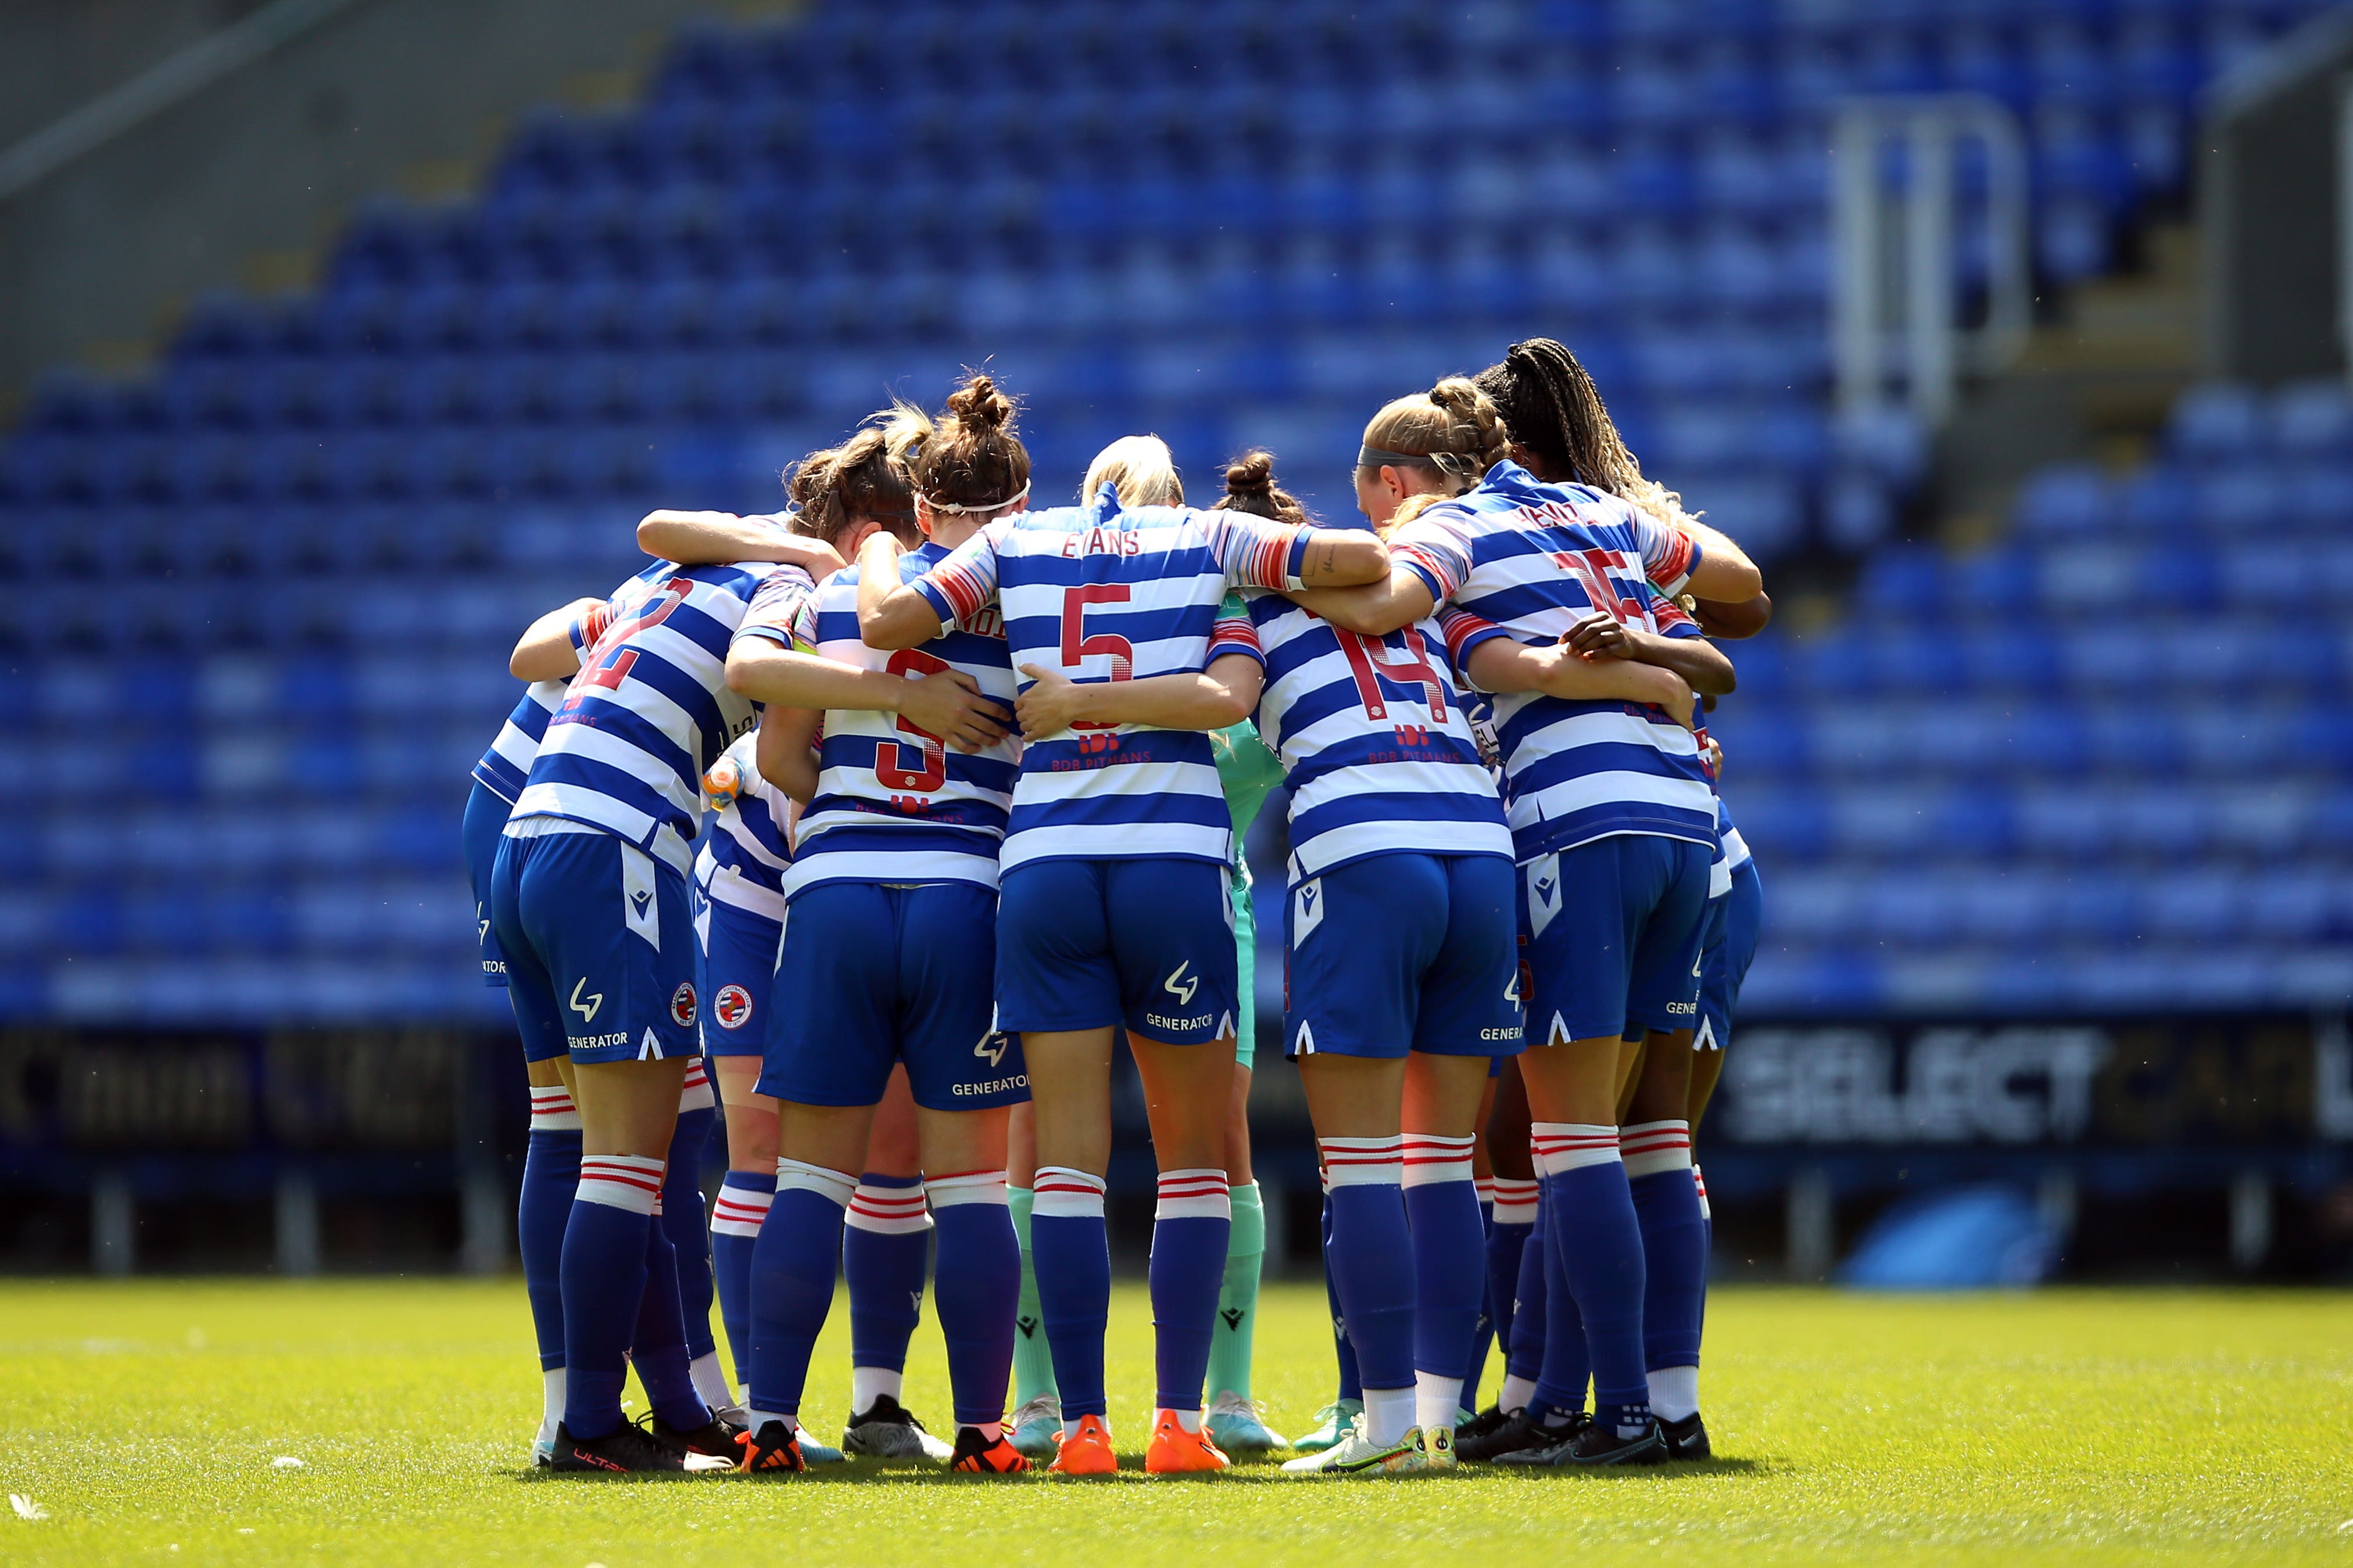 Reading were relegated from the Women’s Super League